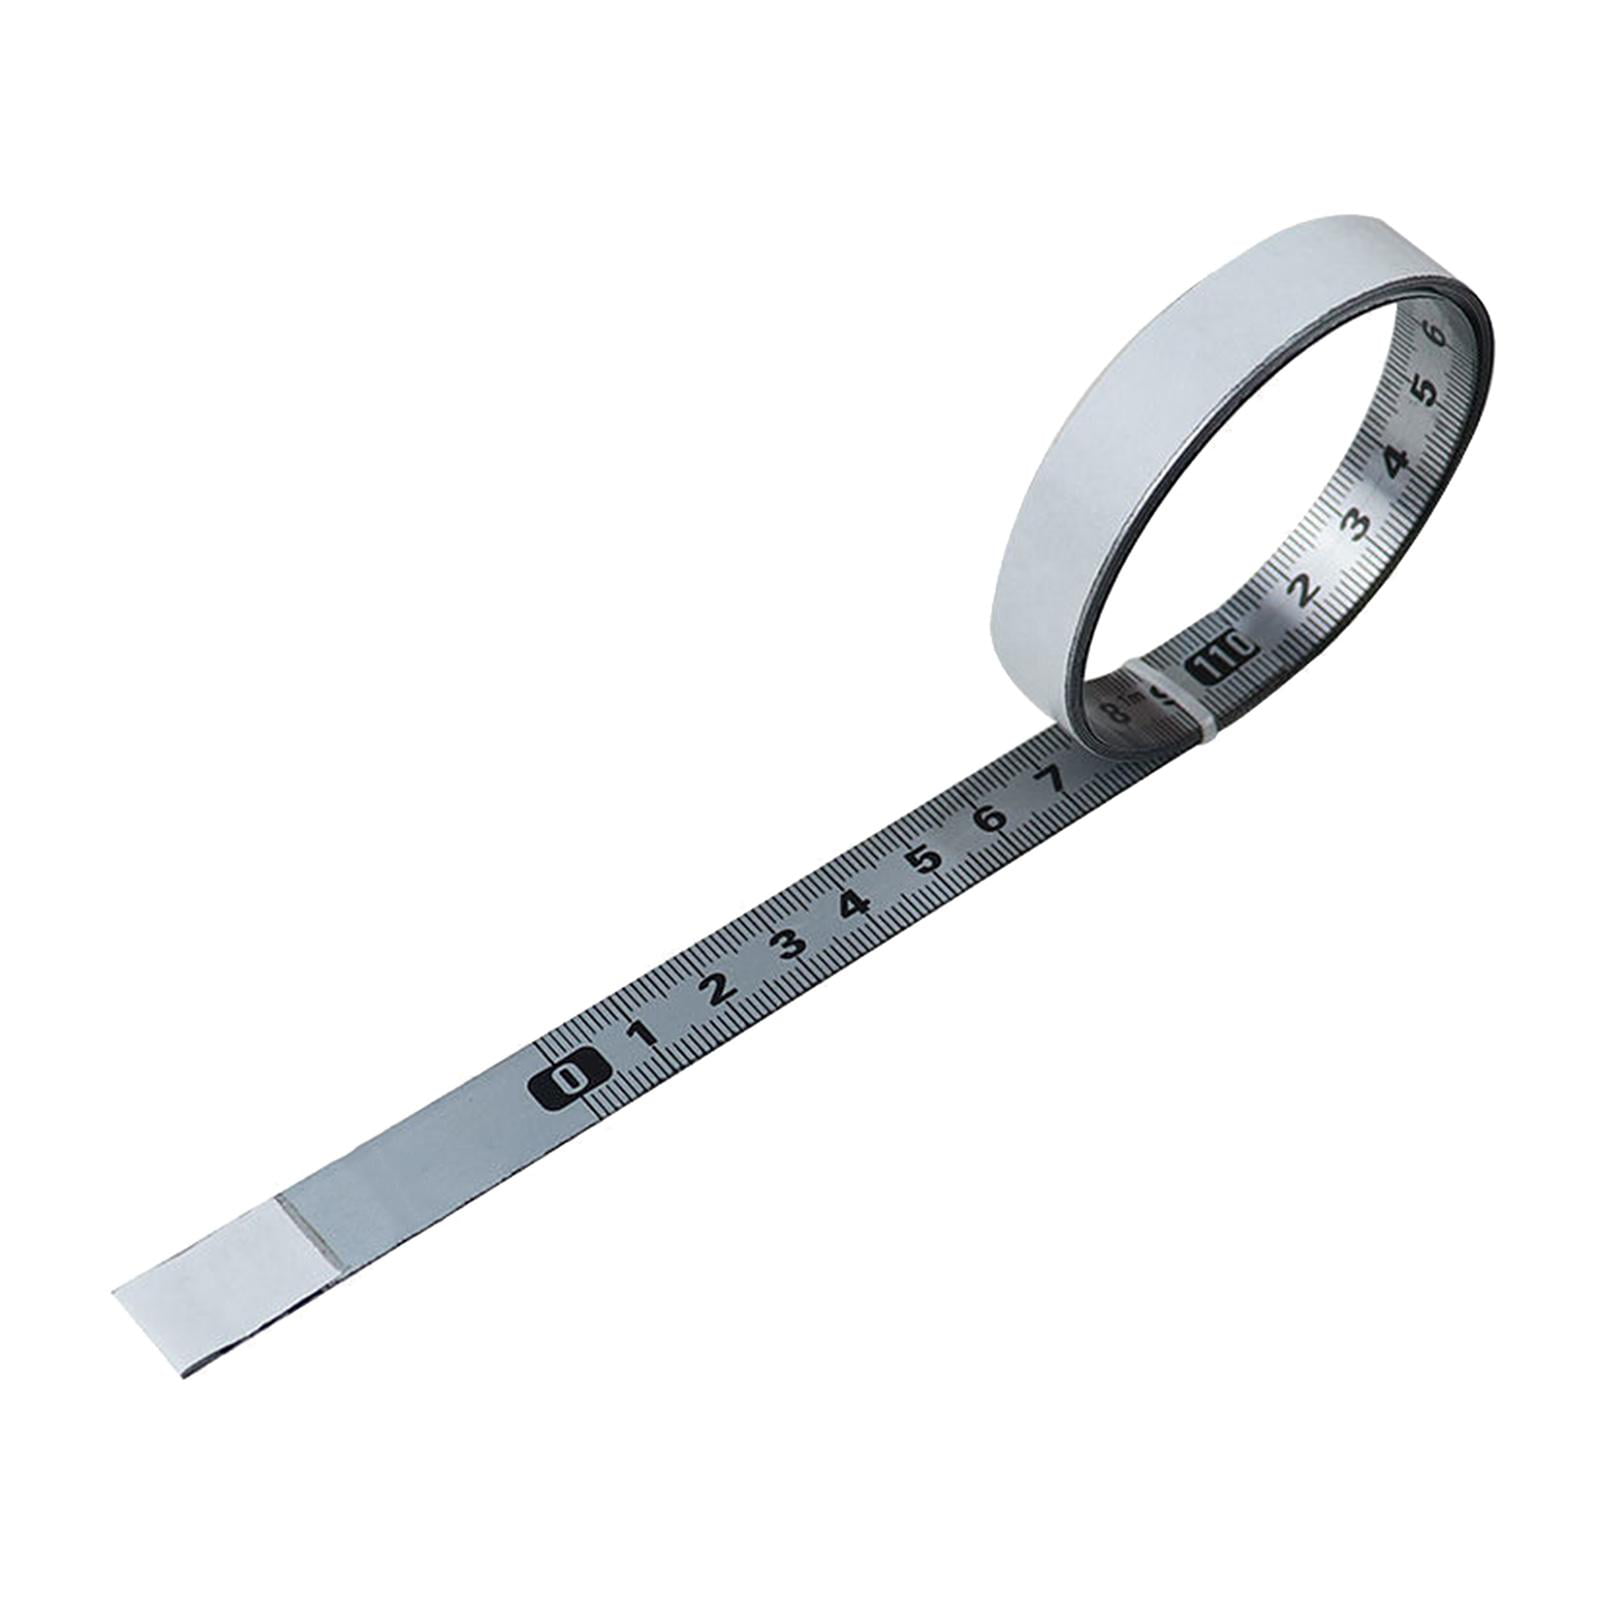 1Pc Self-adhesive Tape Measure, 1/2/3/4/5/6m Centered Measuring Ruler  Self-adhesive Stainless Steel Metric Track Tape Measure Scale Ruler for